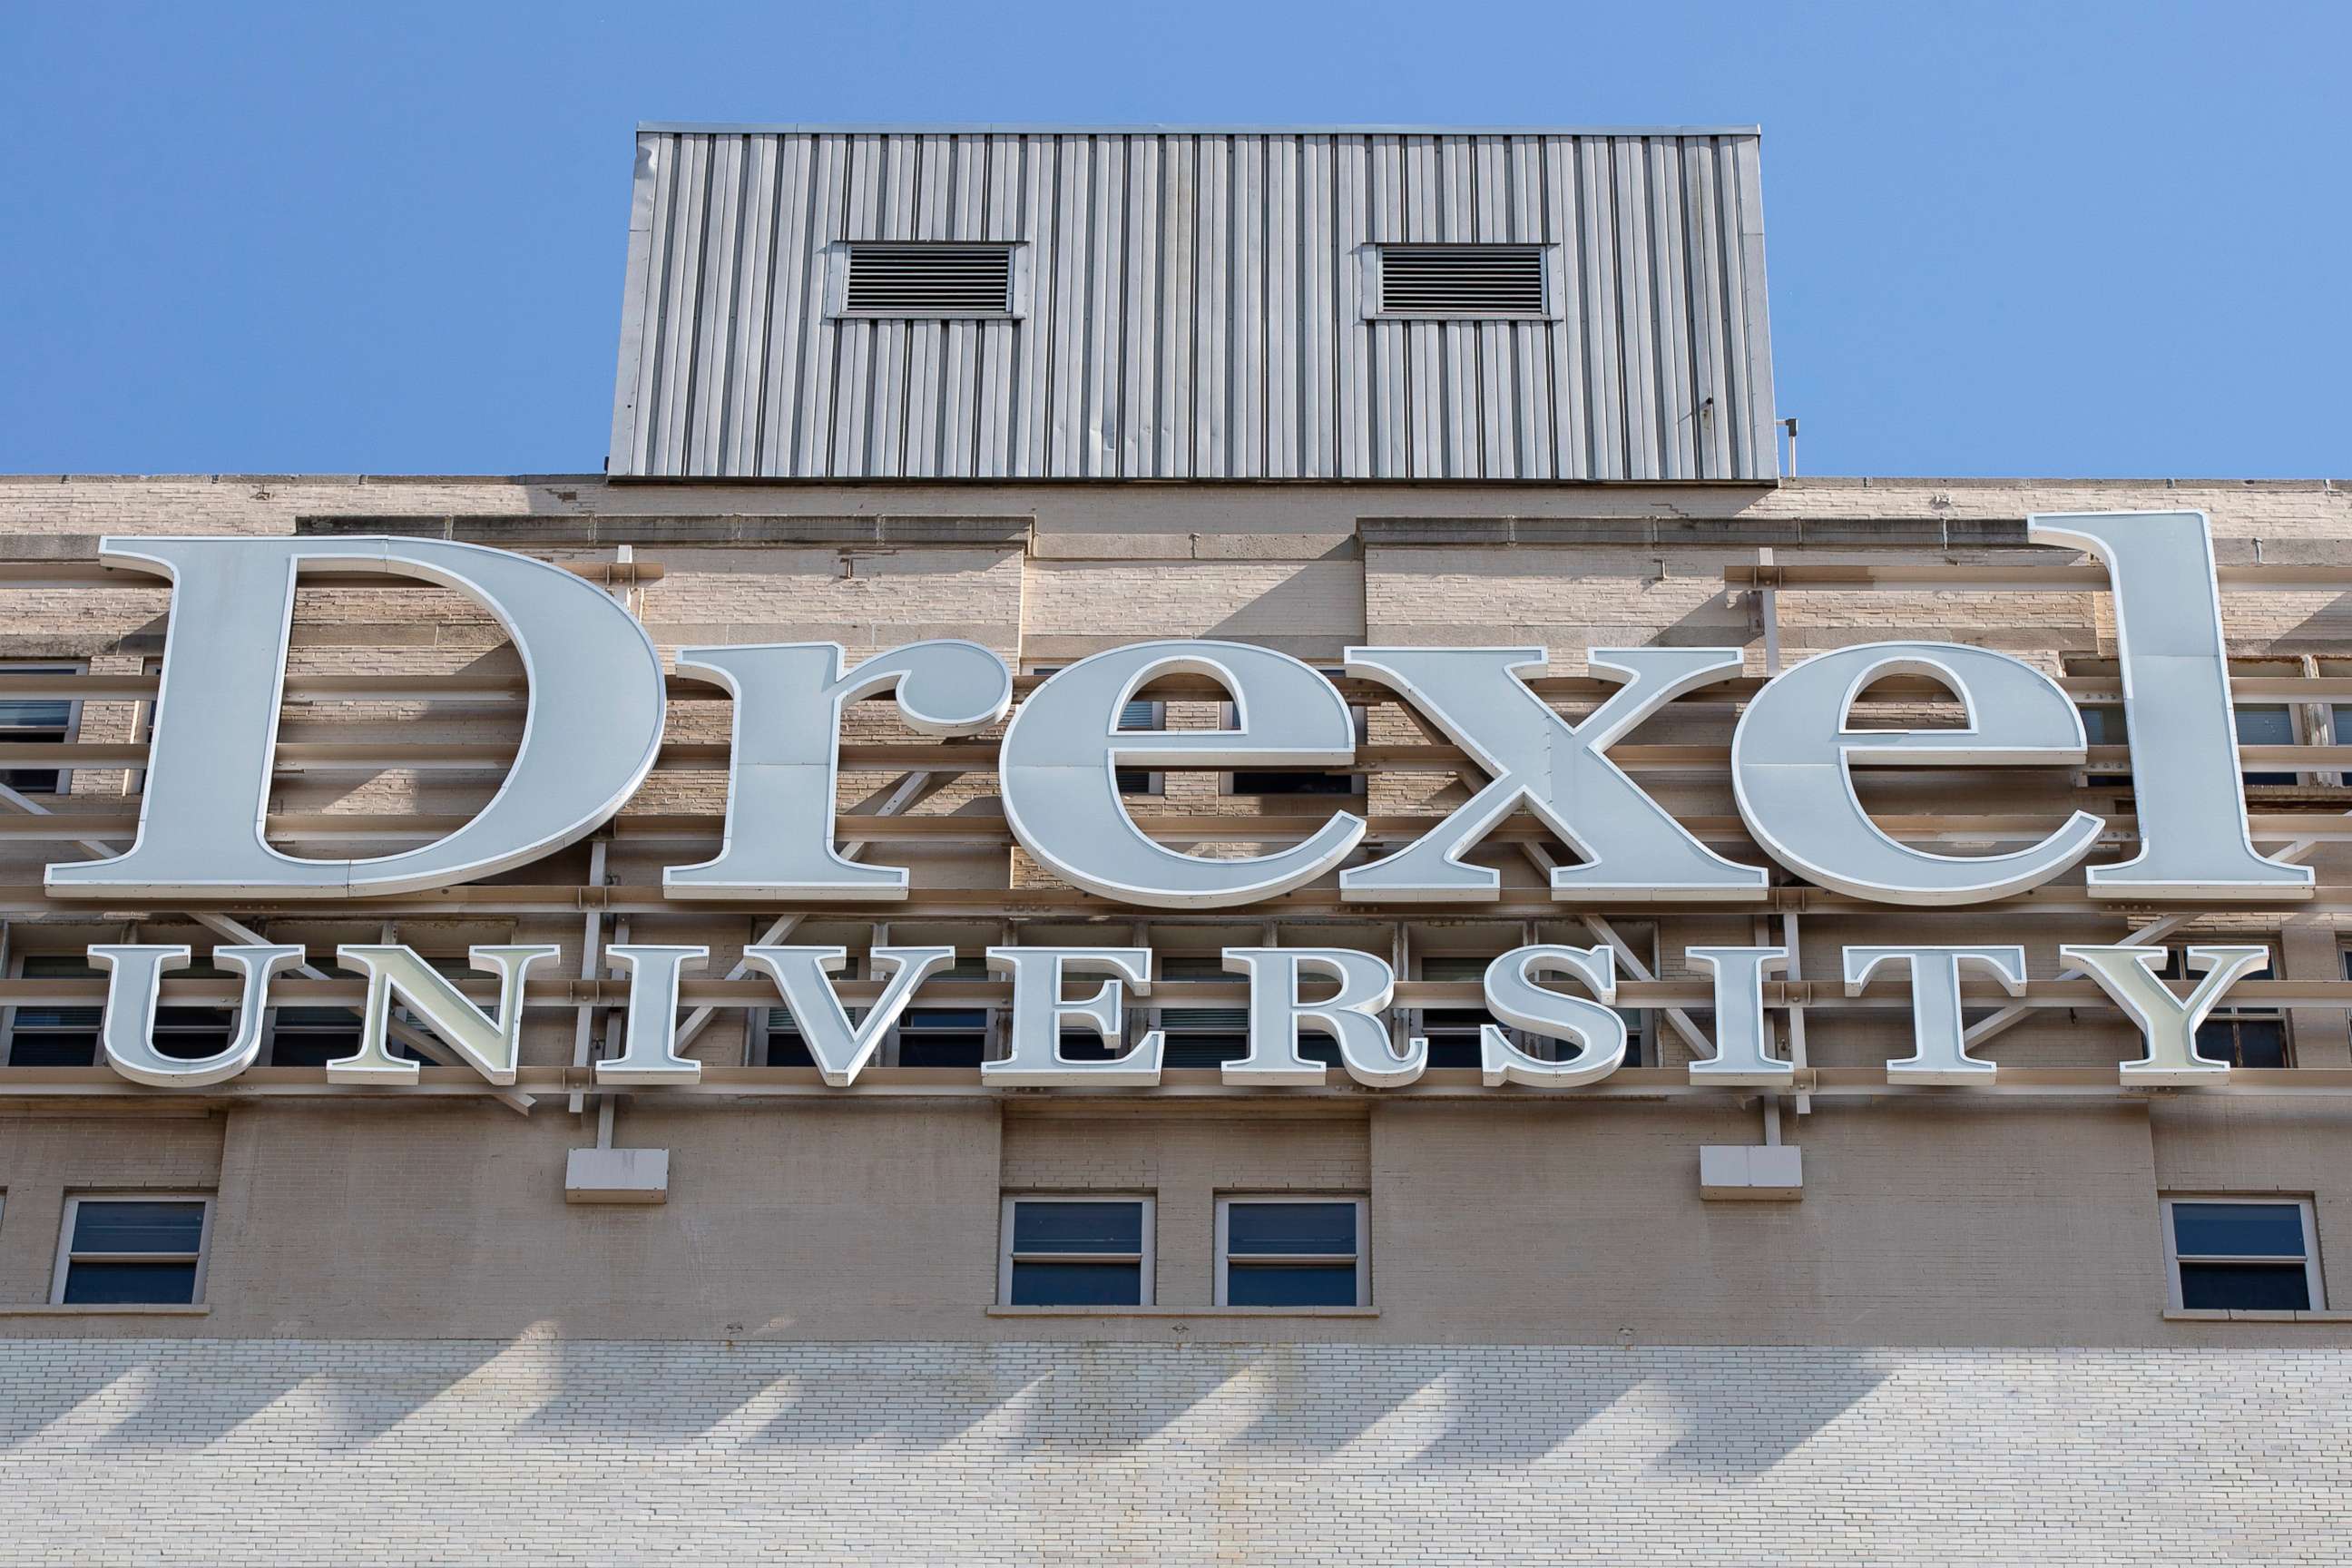 PHOTO: A sign for Drexel University in Philadelphia, May 5, 2019.